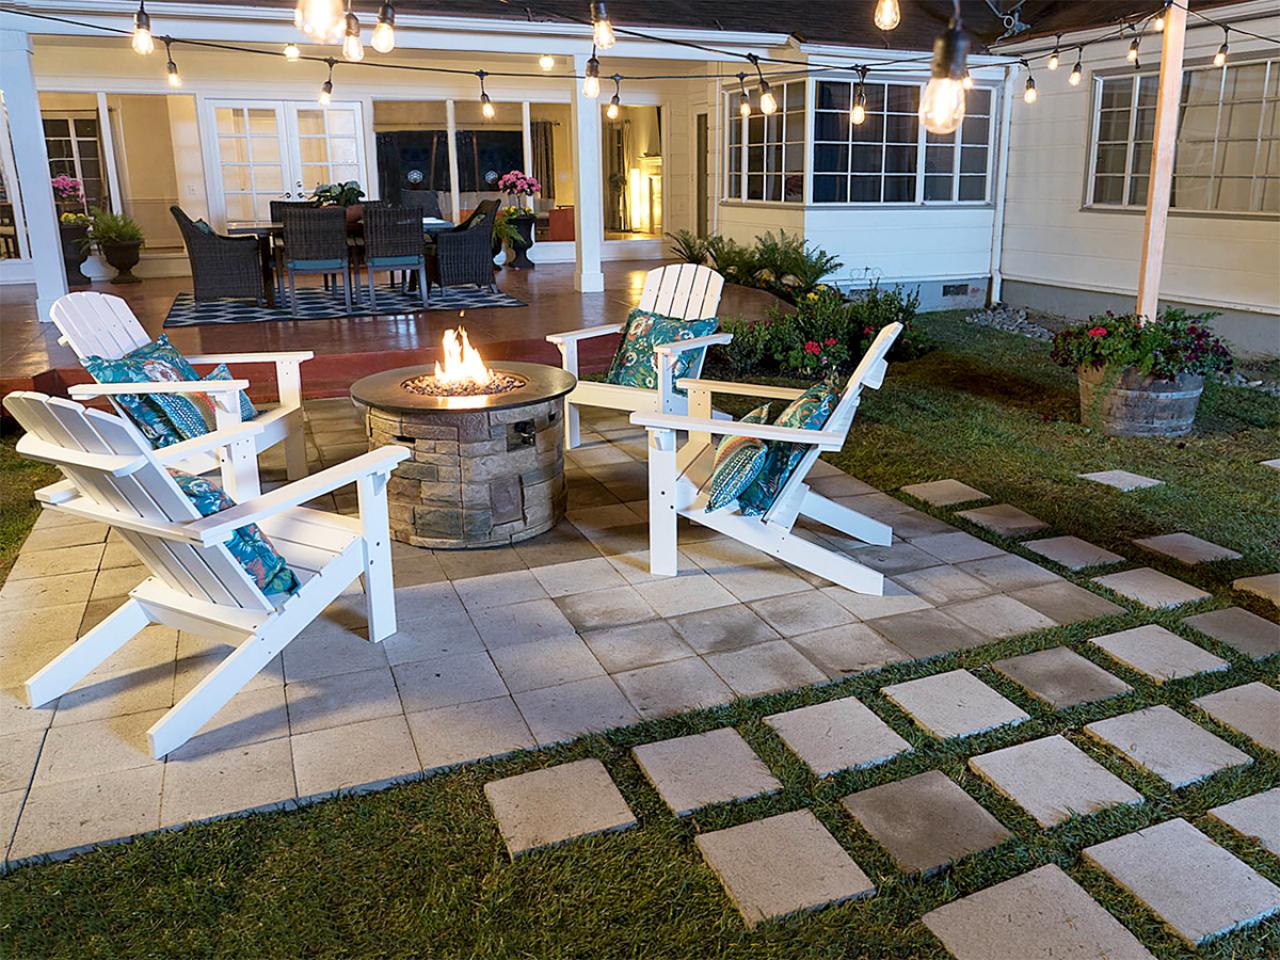 How To Lay A Paver Patio For Firepit, Diy Retaining Wall Fire Pit